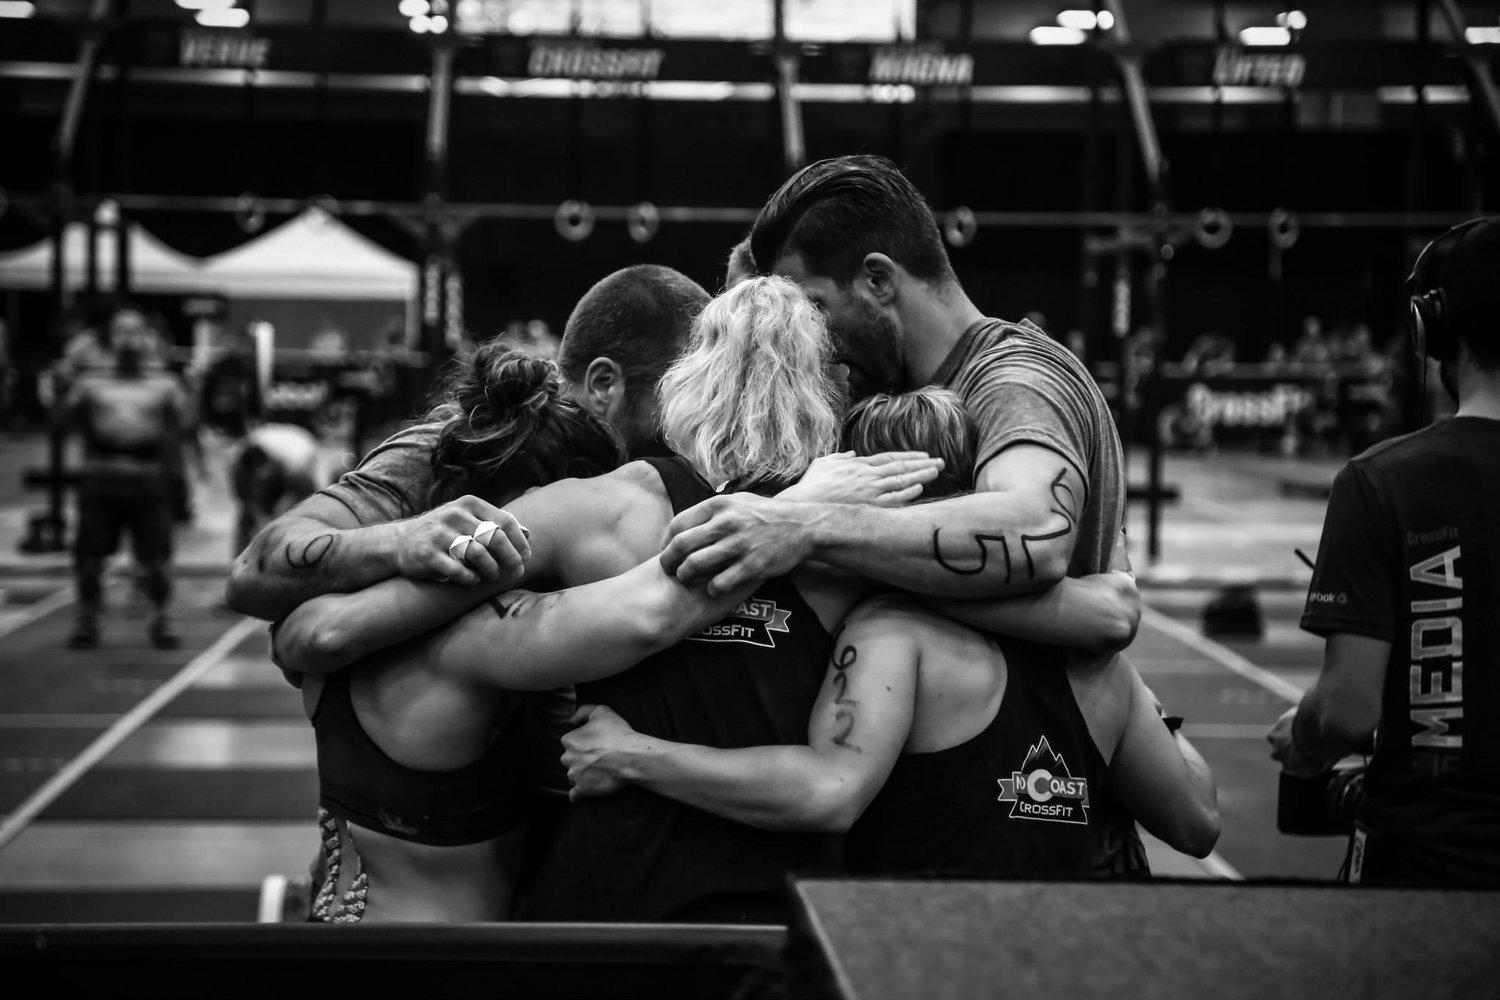 No-Peats to Three-Peats: The Road to the 2015 CrossFit Games South Regional